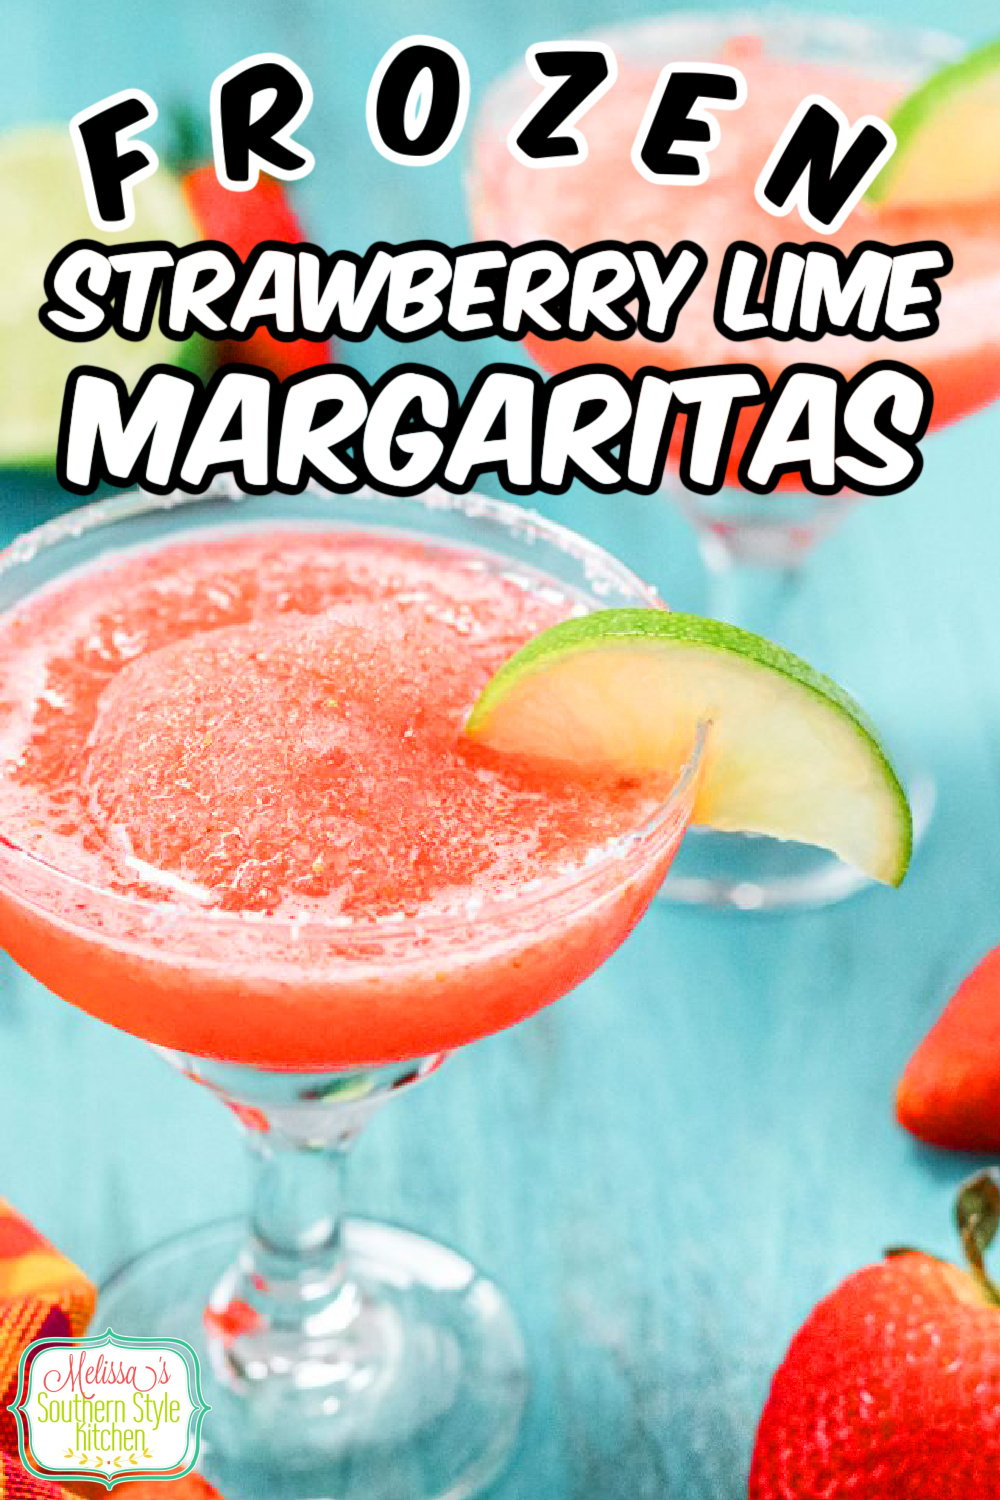 These Easy Frozen Strawberry Lime Margaritas are just the ticket when creating your own fiesta #margaritas #strawberrymargaritas #strawberrylimemargaritas #virginmargaritas #drinks #partyfood via @melissasssk